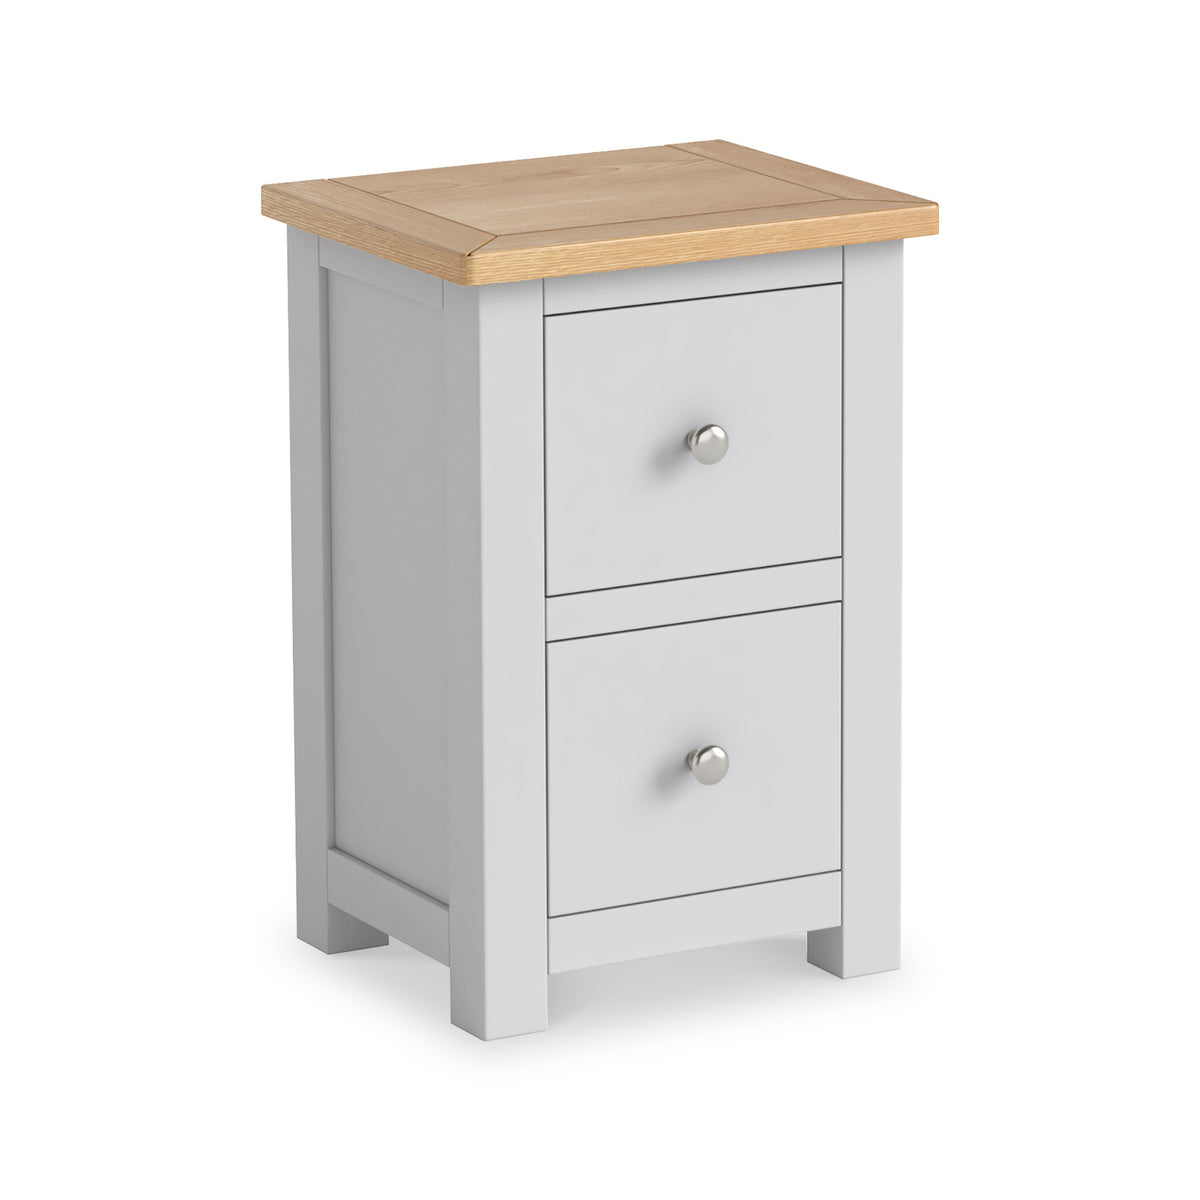 Duchy Inox Grey 2 Drawer Bedside Table with Oak Top from Roseland Furniture